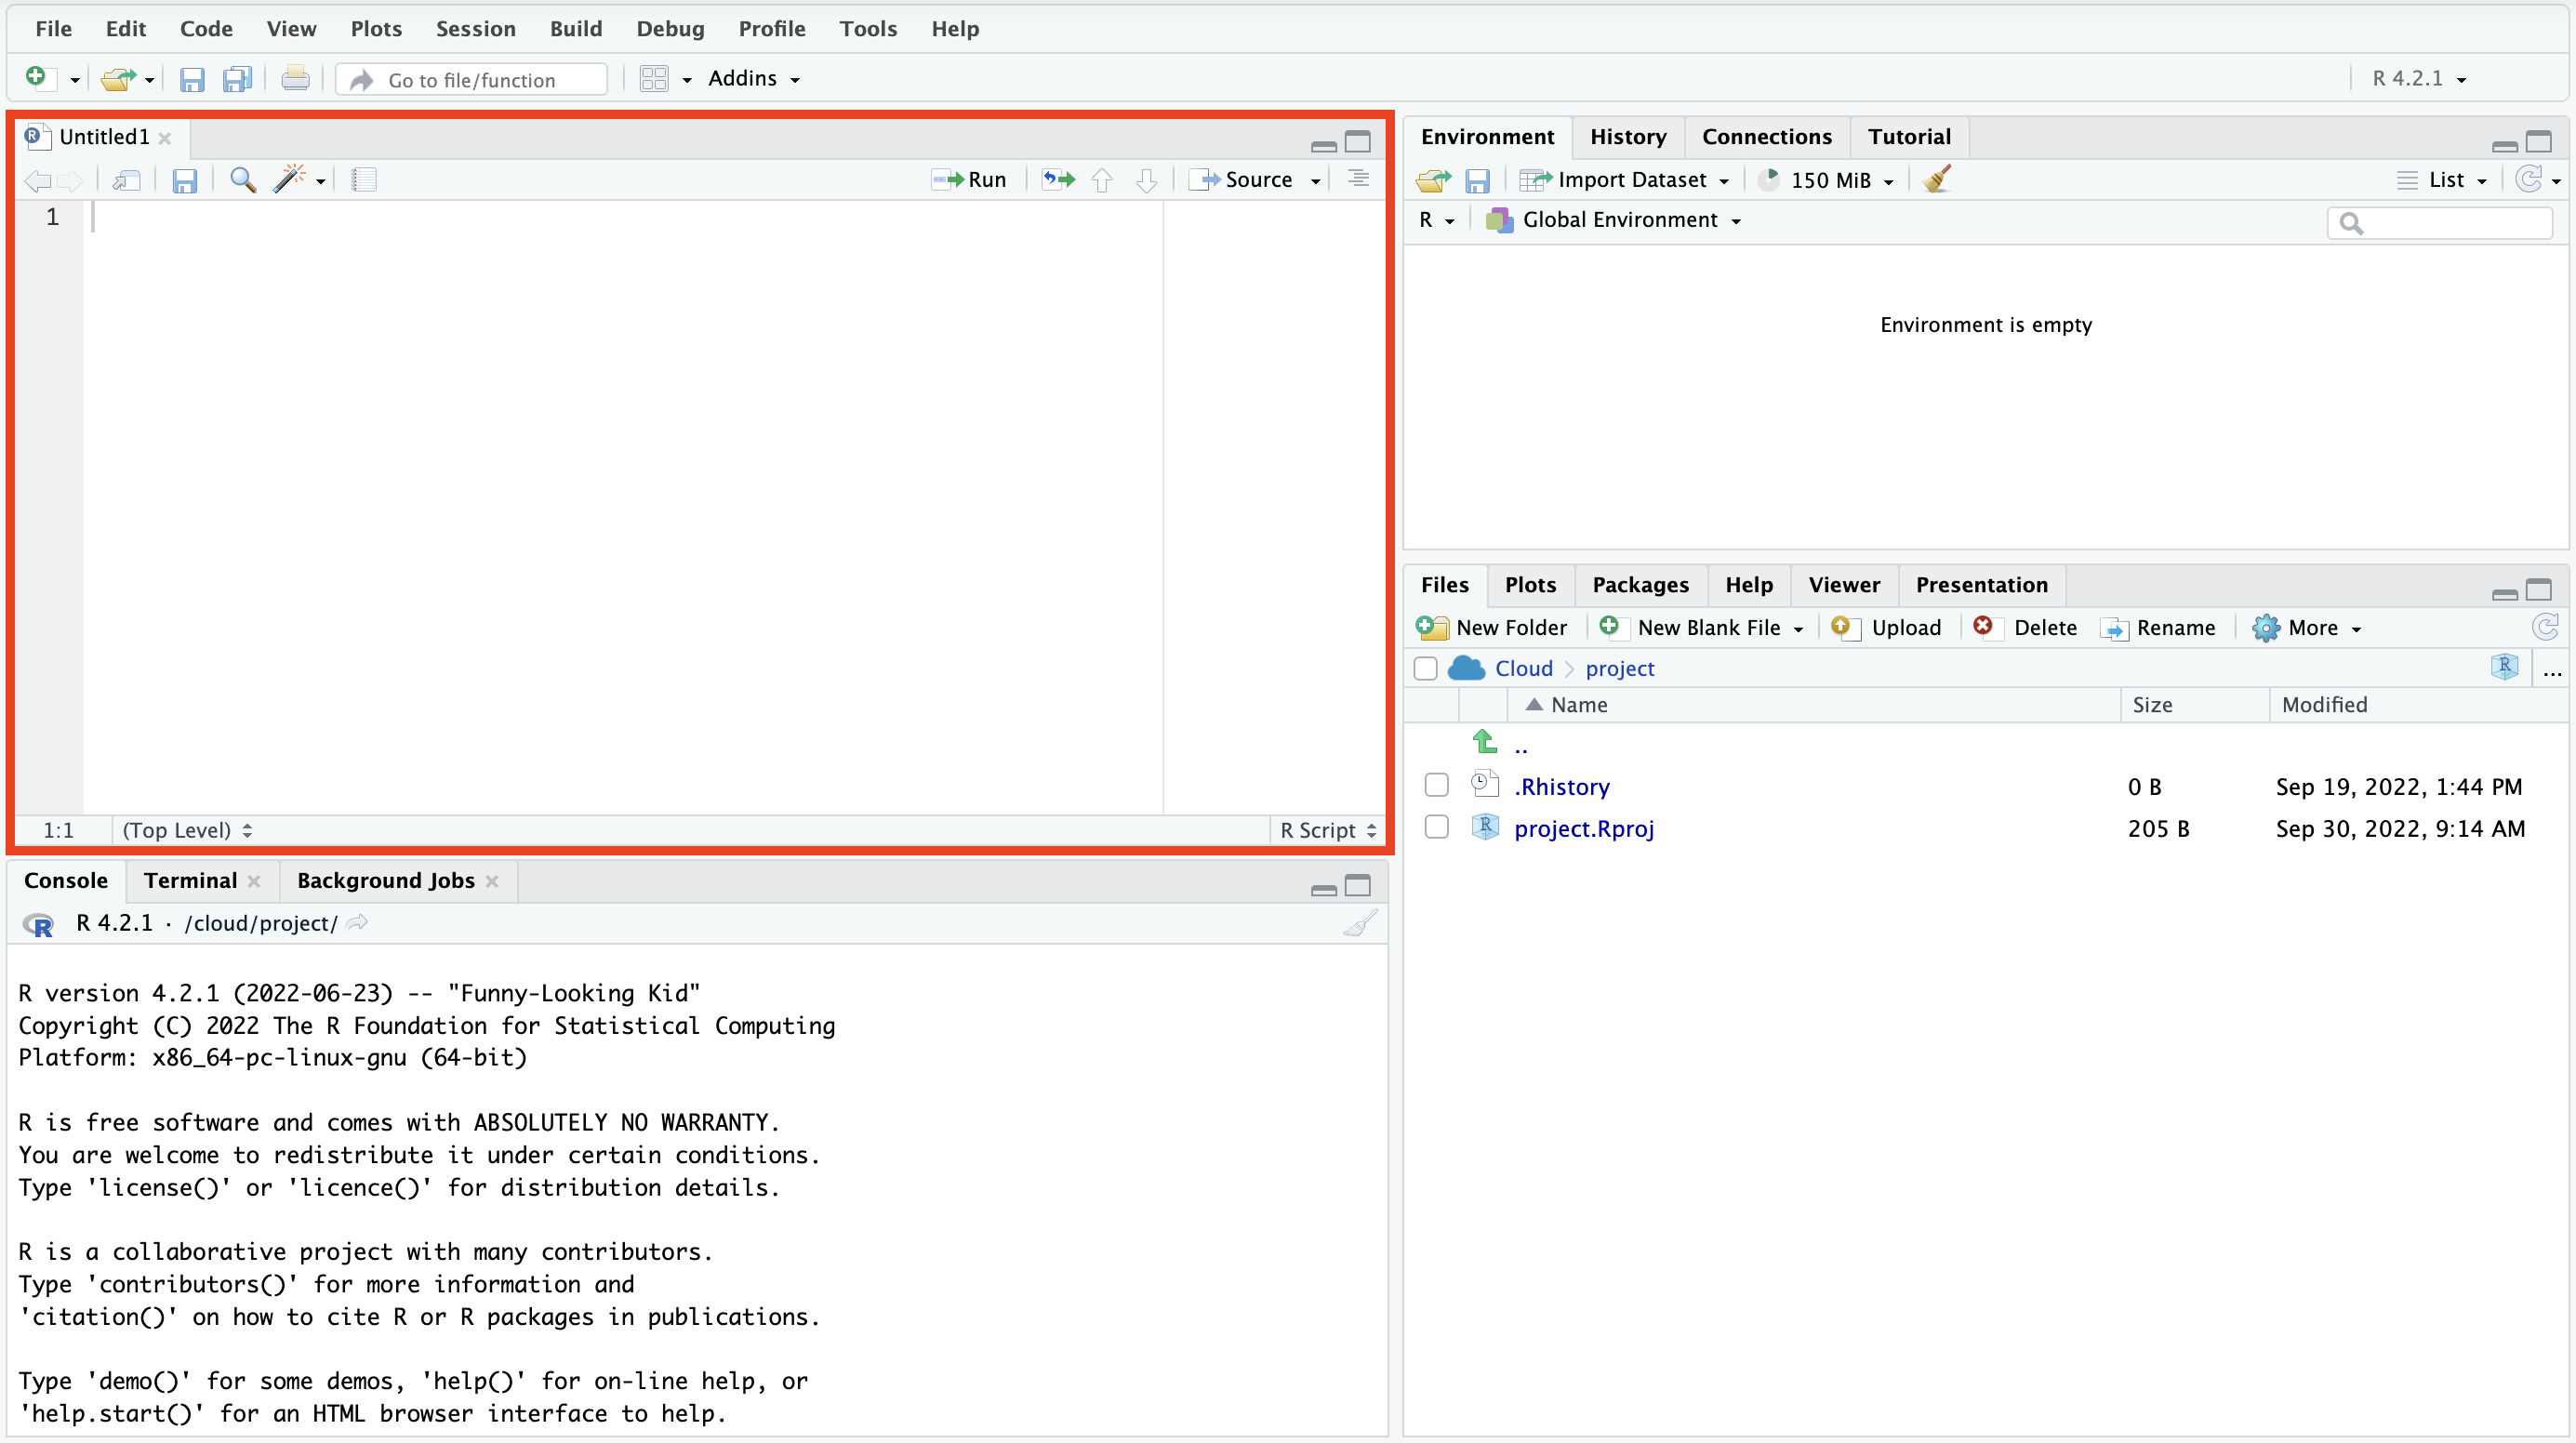 The RStudio interface with the source pane highlighted in red